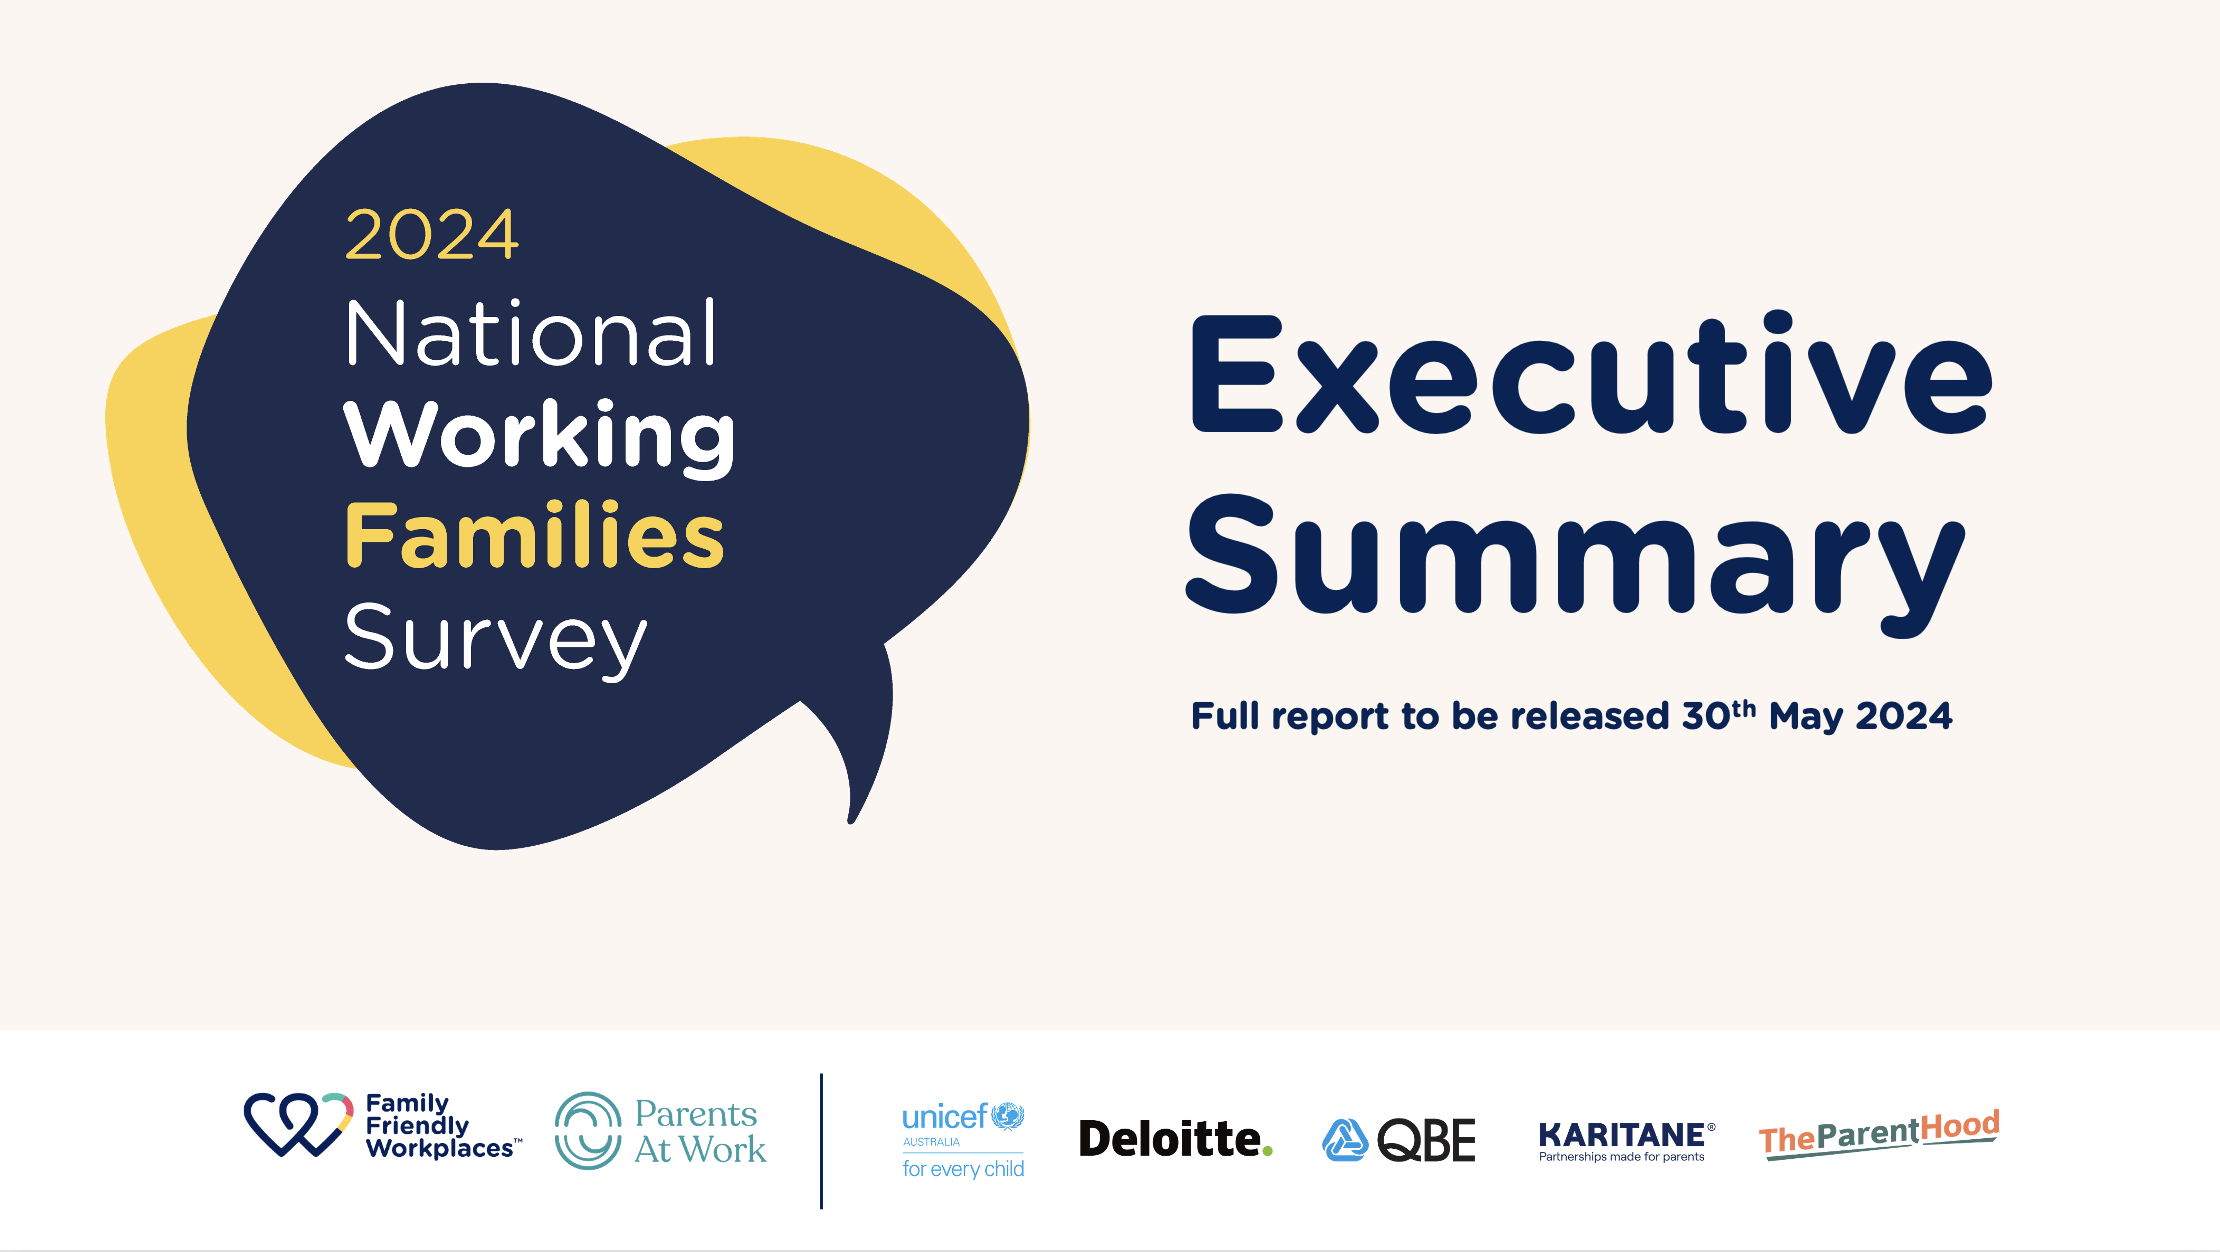 National Working Families Survey Executive Summary and Key Findings Document